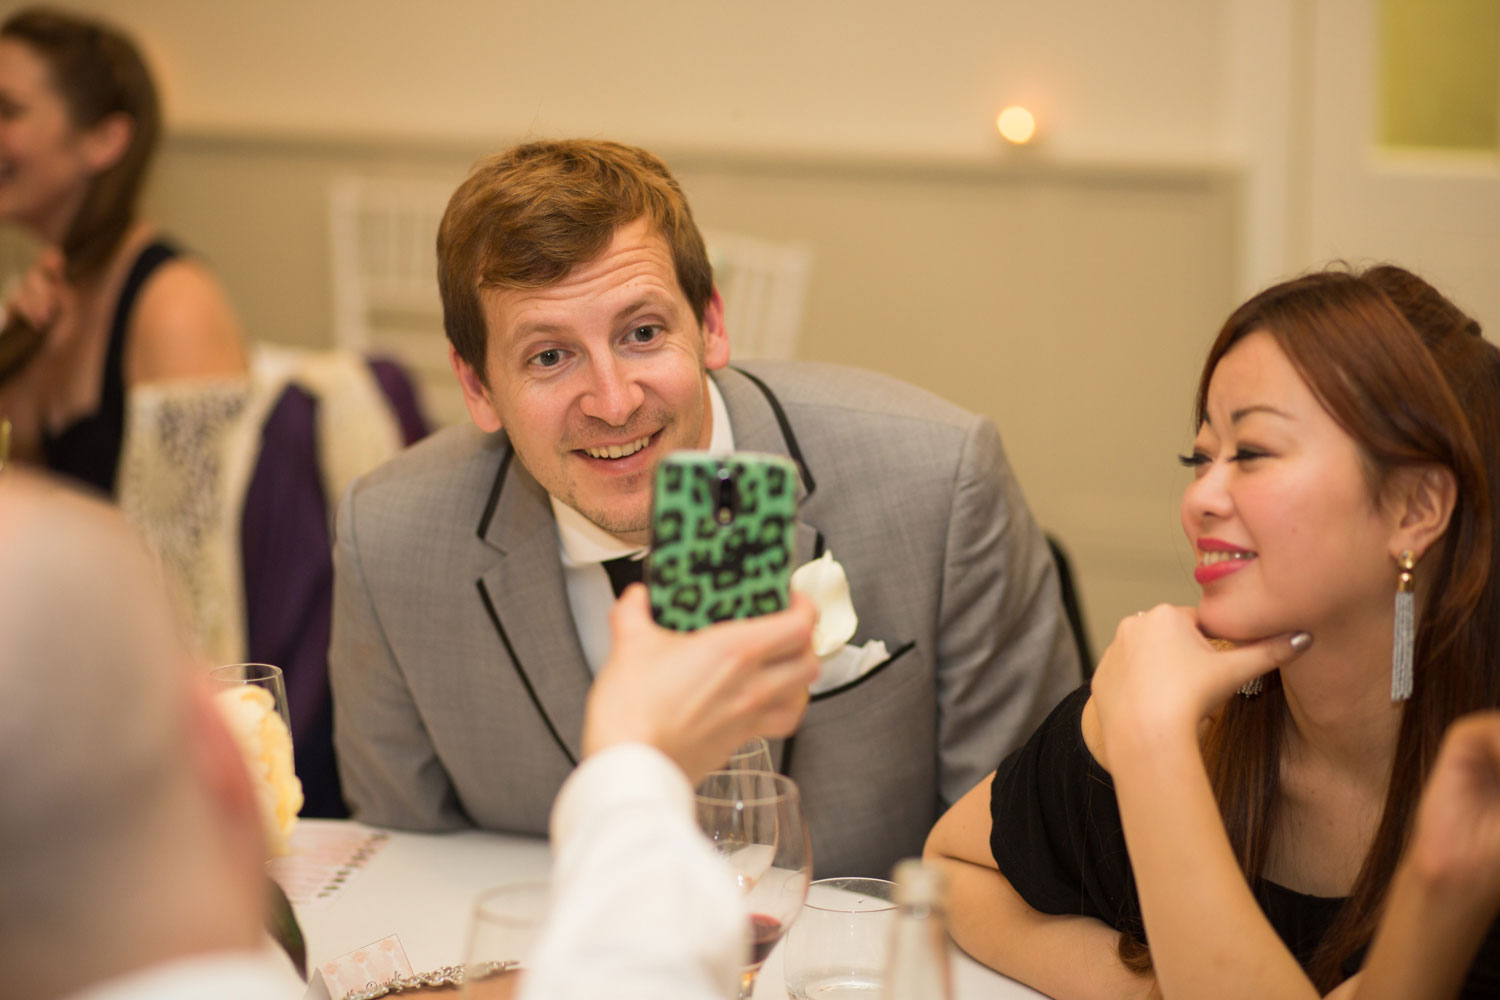 wedding guest looking at phone during reception